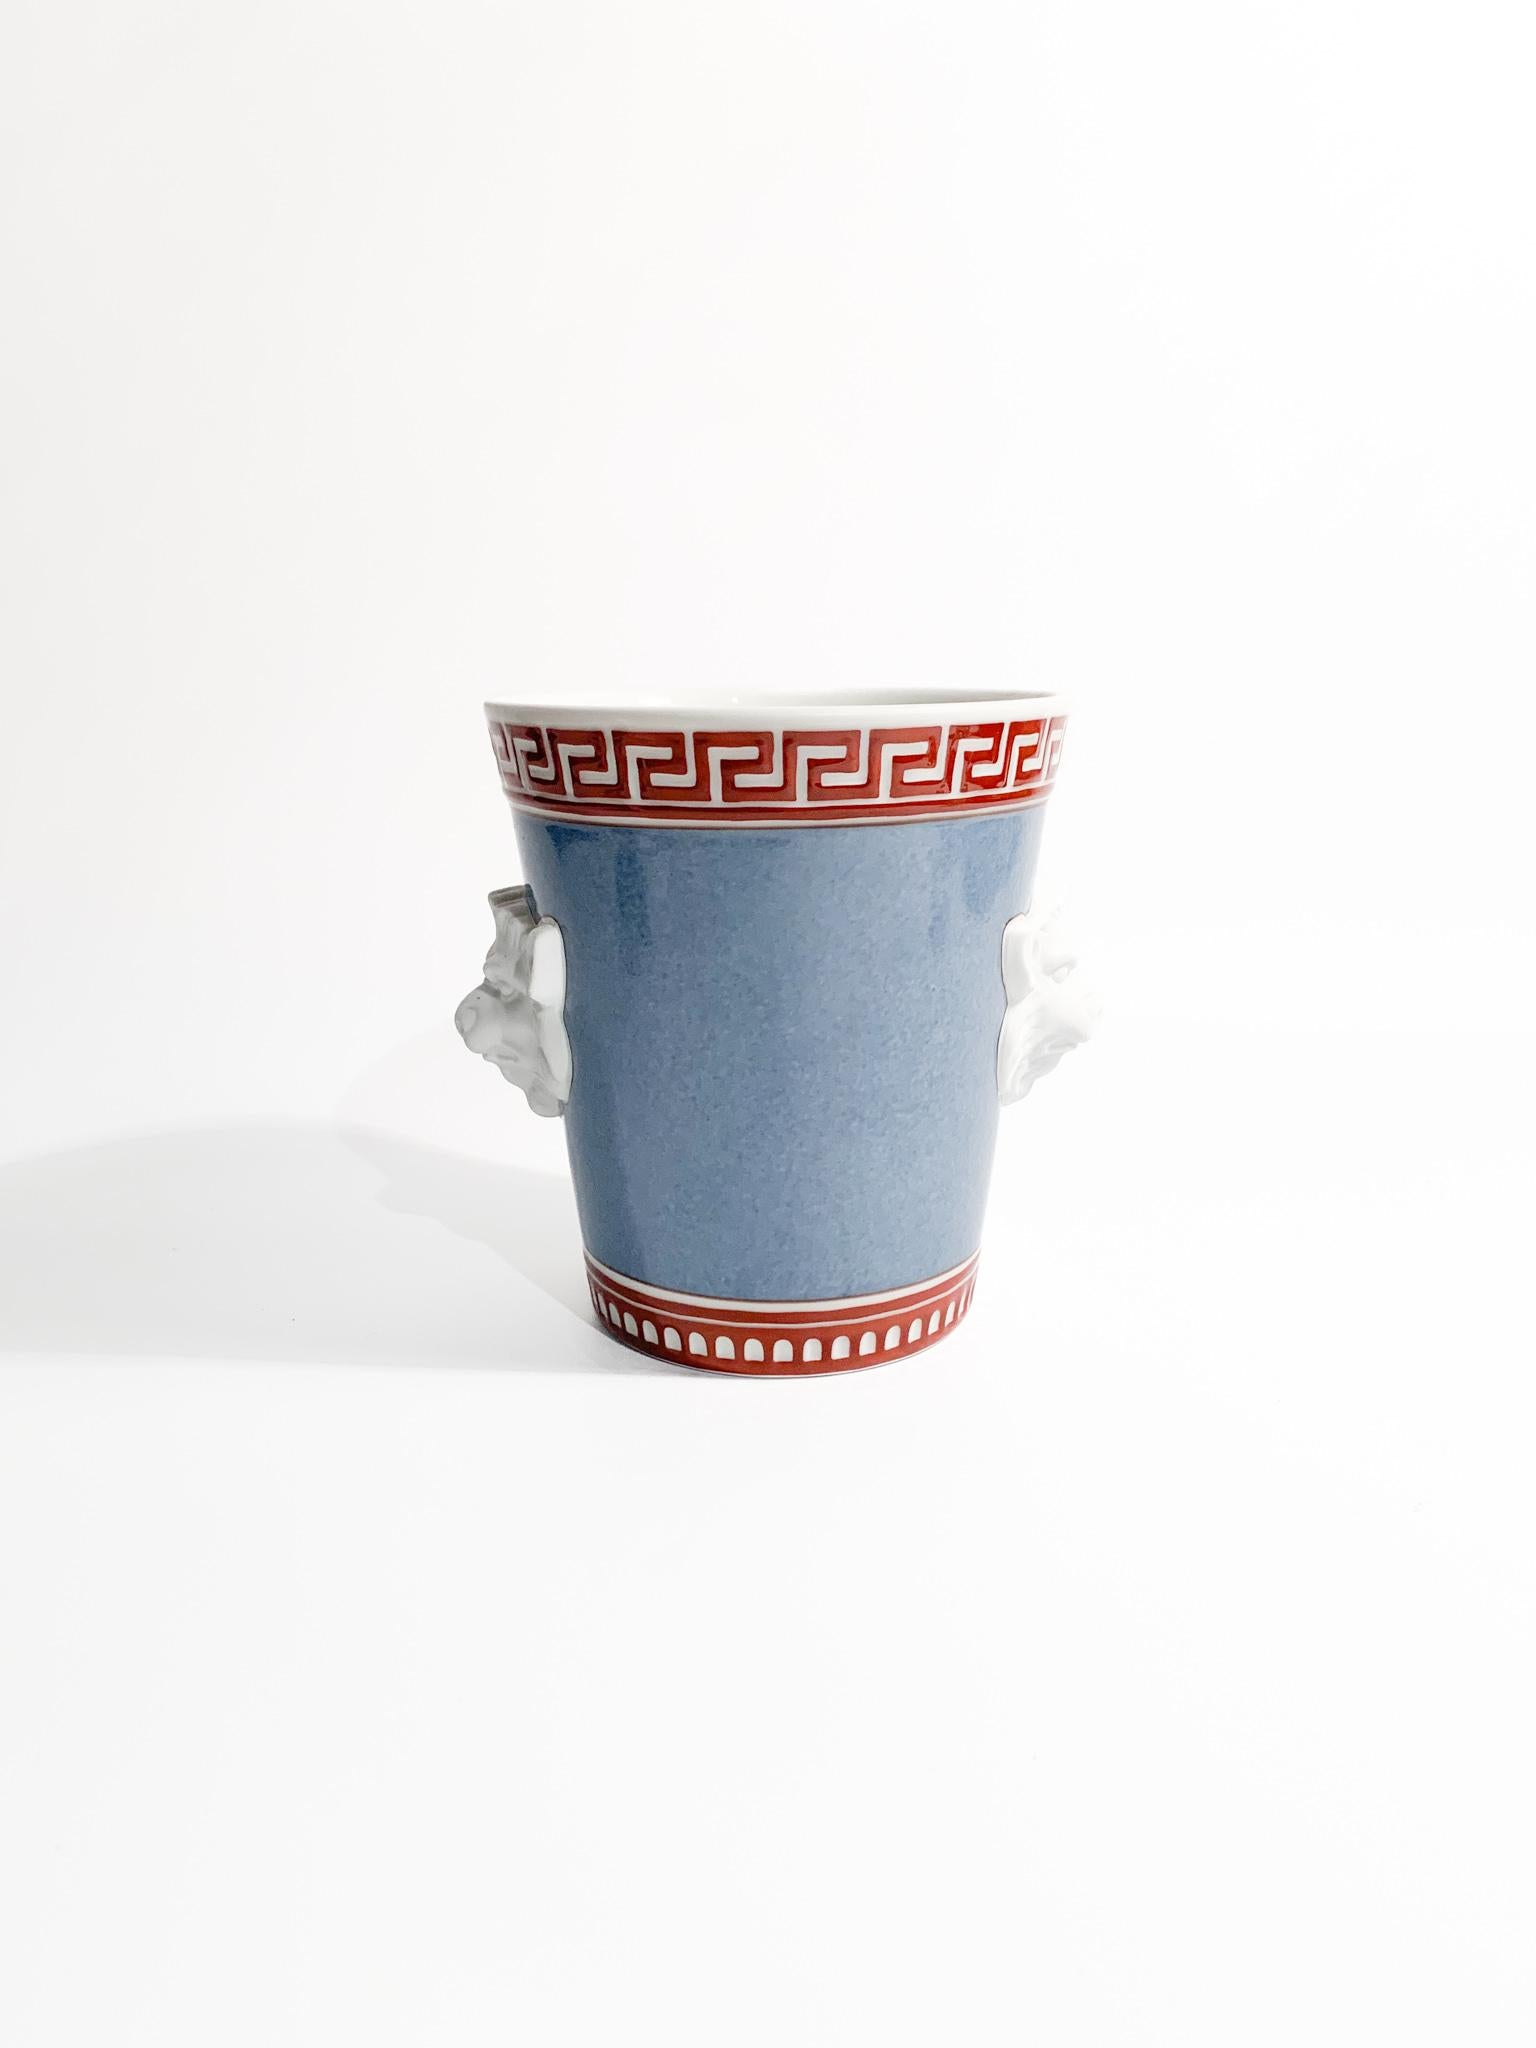 Ceramic vase by Richard Ginori, re-edition of the Giardino dei Semplici collection, originally designed by the company between the 18th and 19th centuries. 

Ø cm 13 h cm 14

Company of Lombard origin founded in 1896 when the Marquis Carlo Ginori,